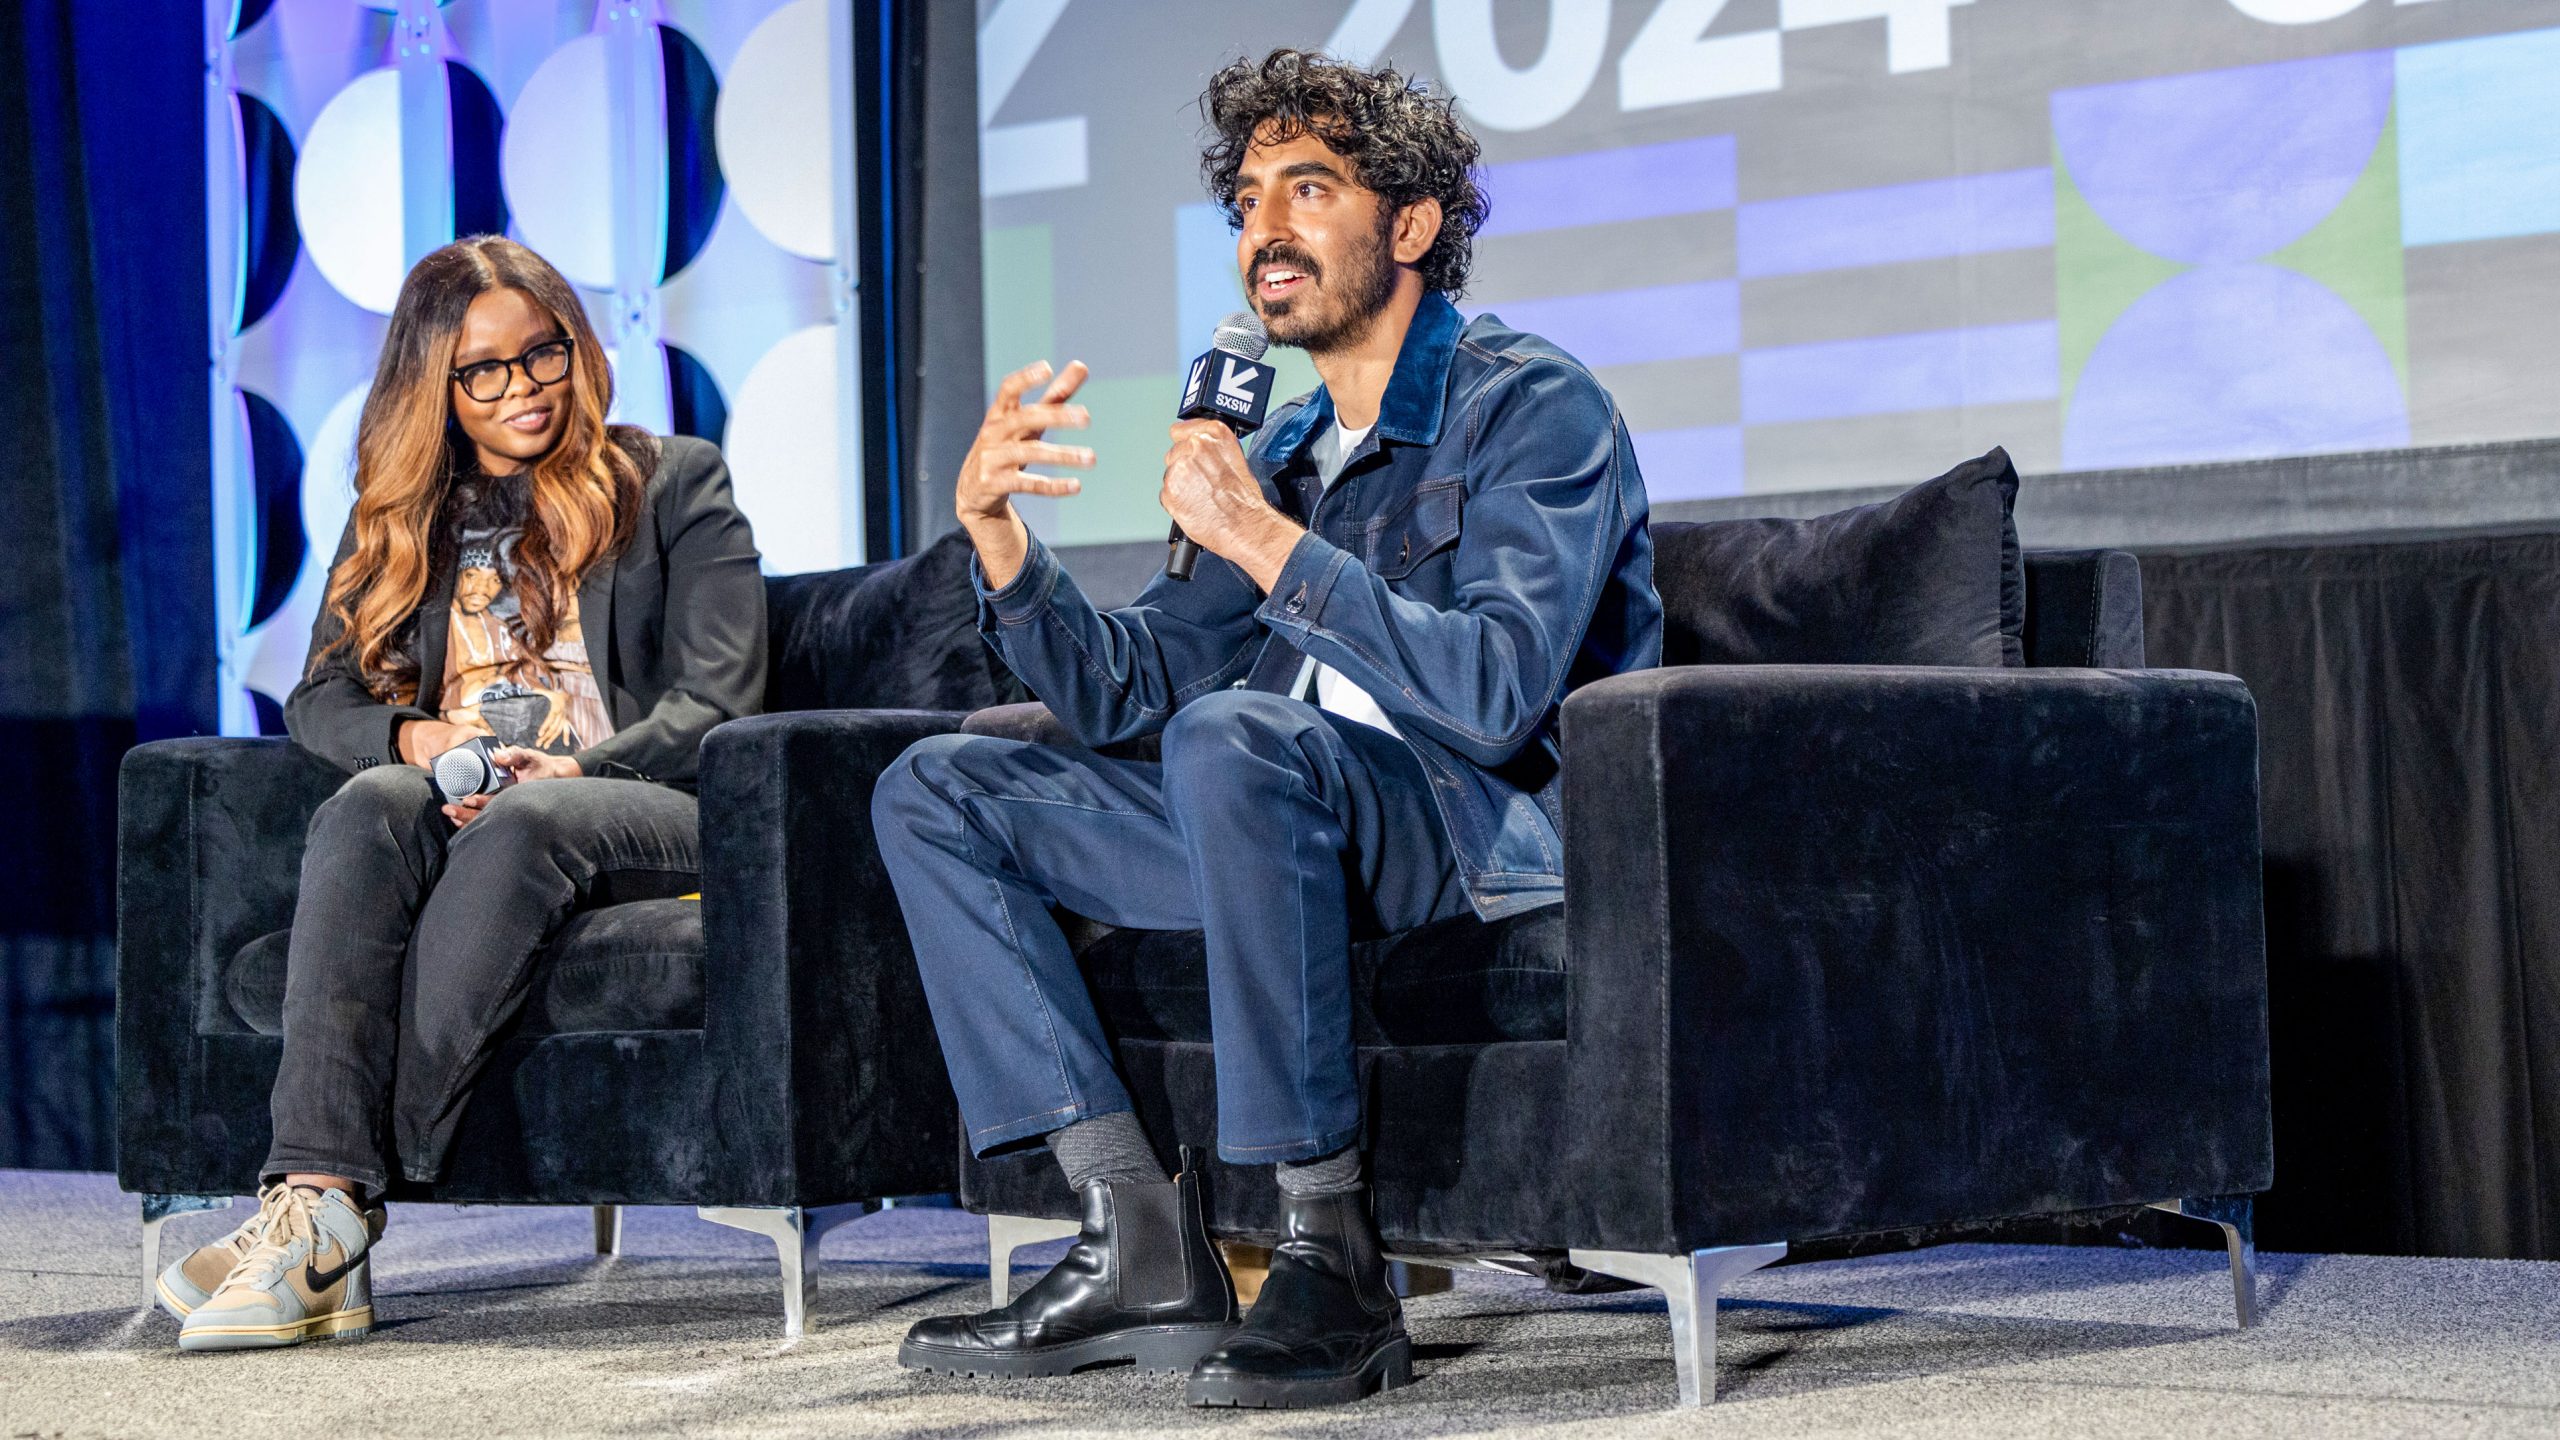 Featured Session with Dev Patel - Photo by Marina Alvarez